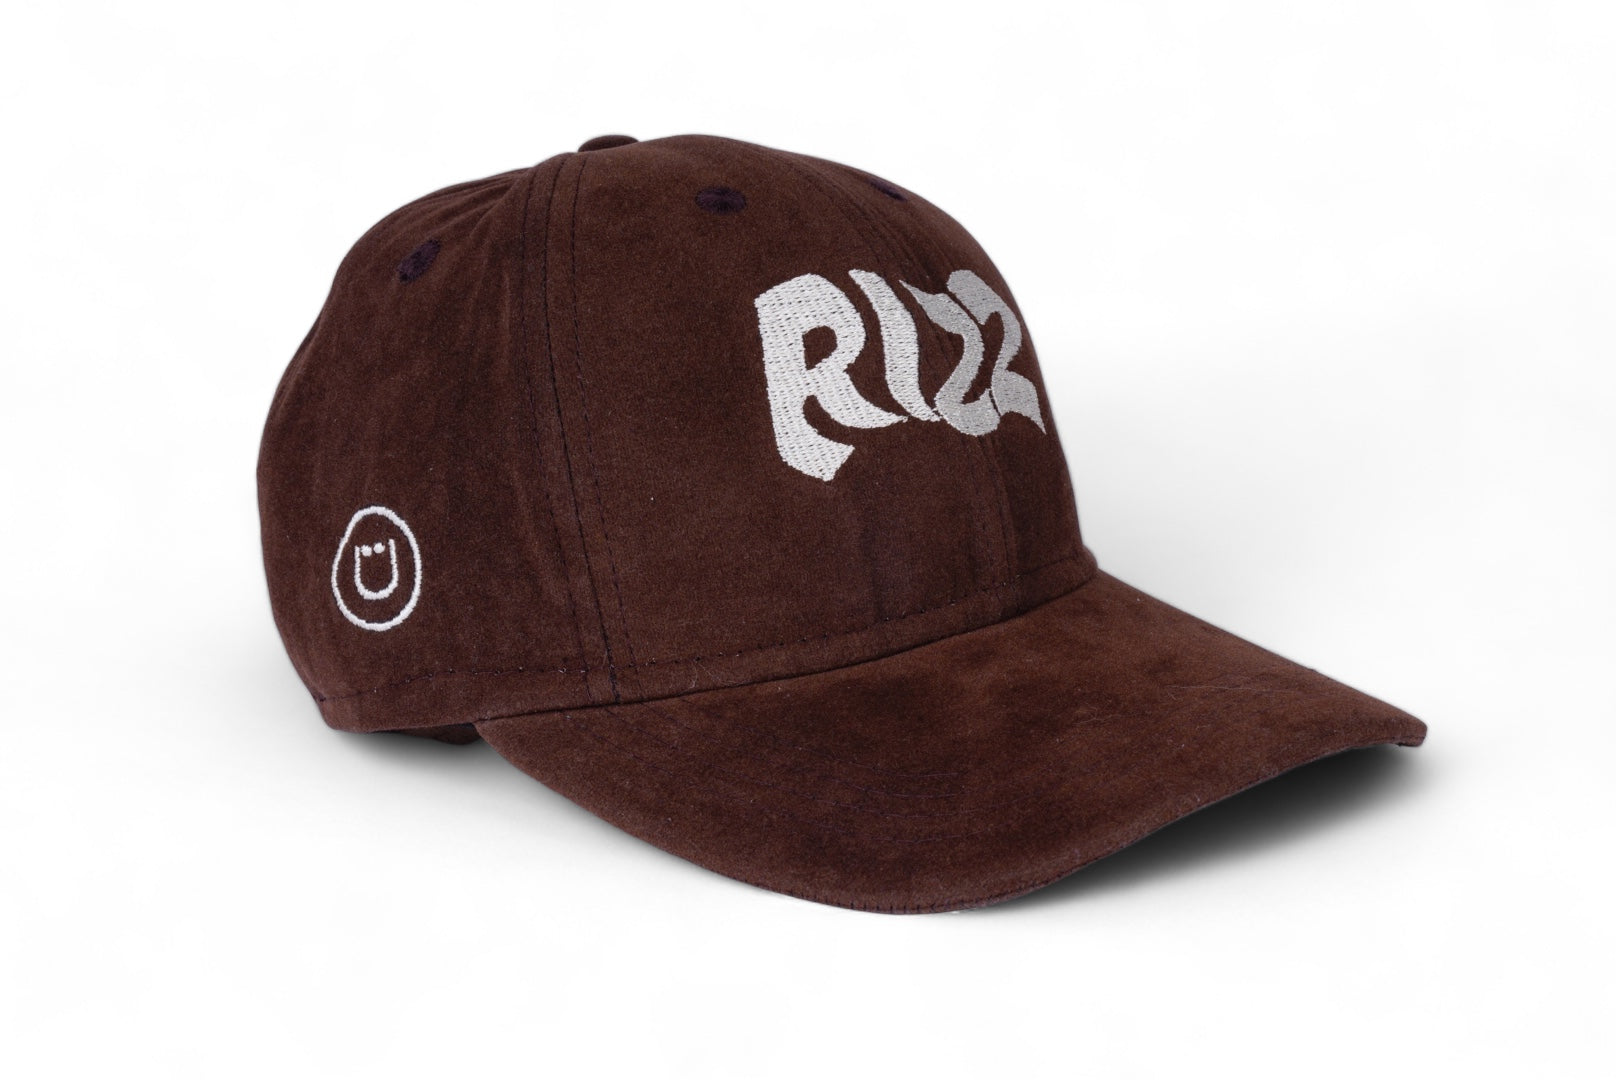 Stylish Brown snapback cap made with premium materials made to rock on all occasions, available at Cop Underdog In-store and ready to ship.